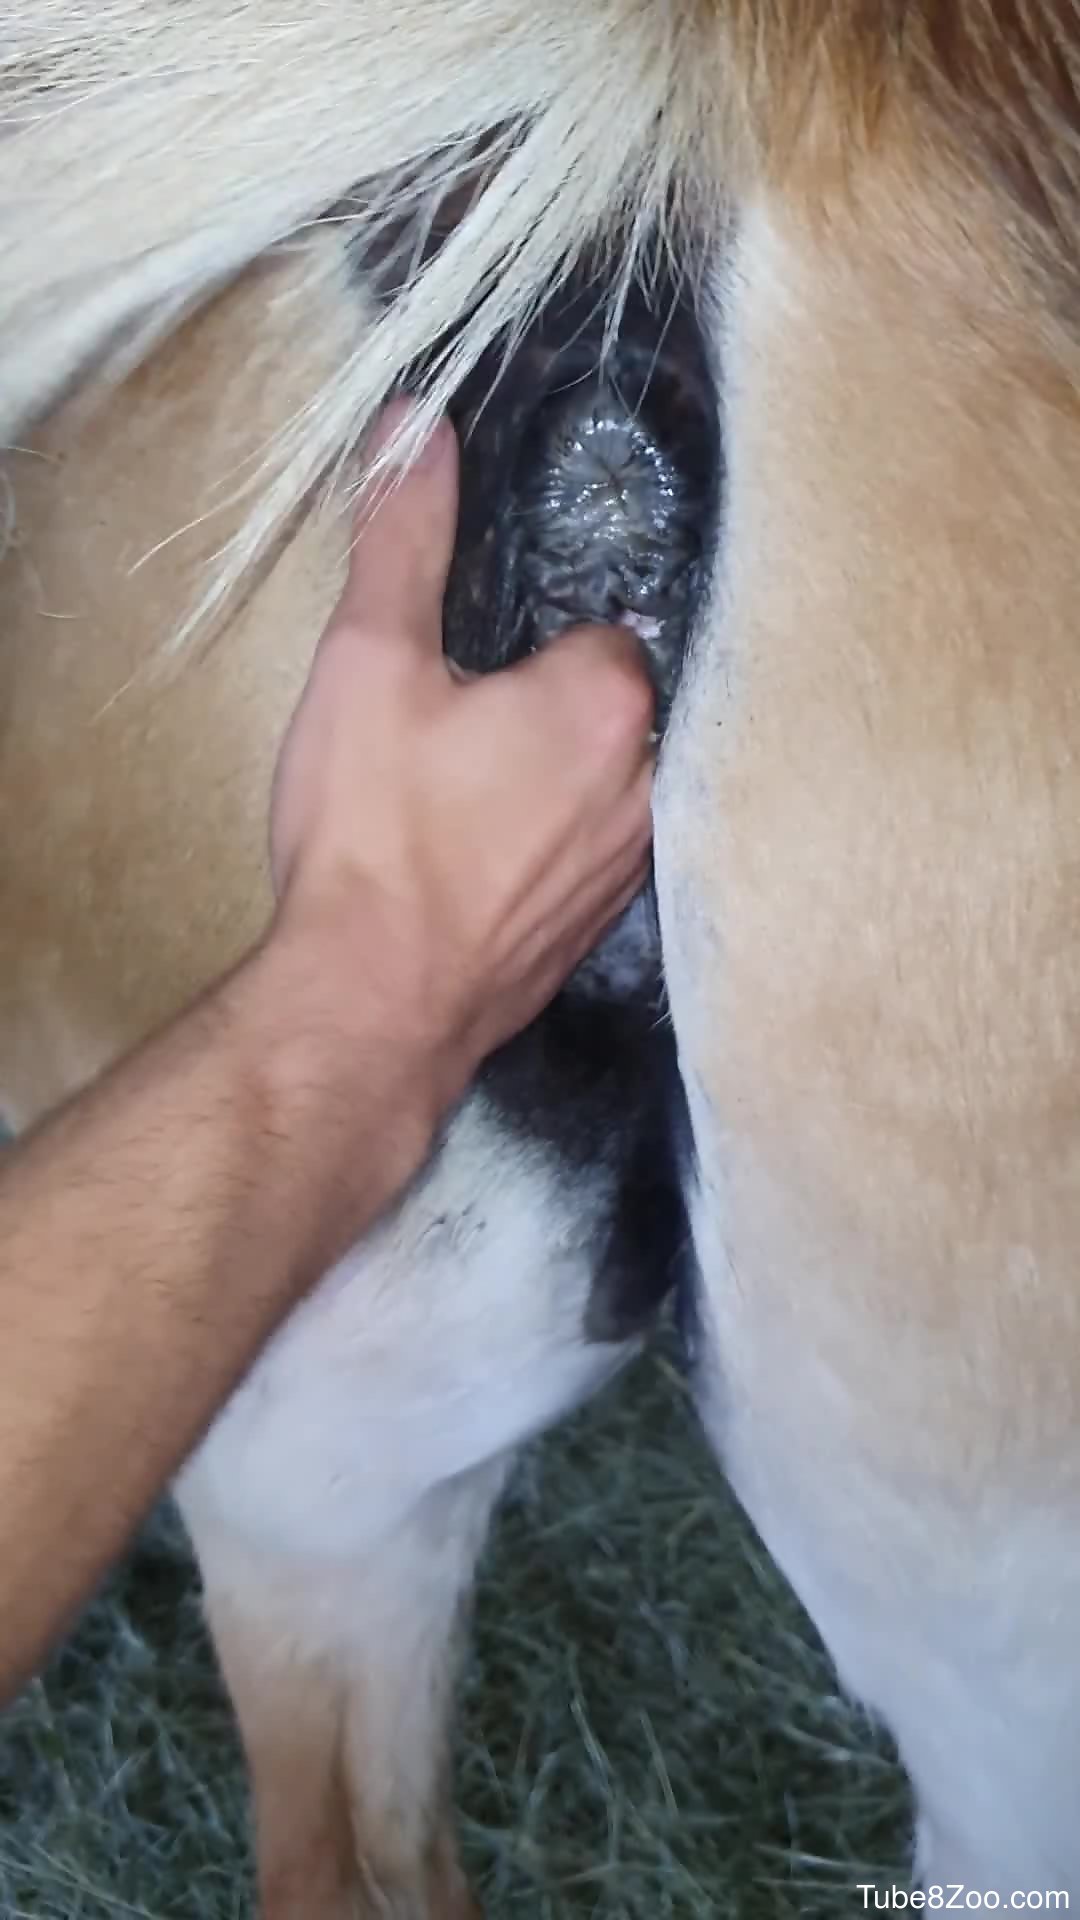 1080px x 1920px - Man finger fucks horse in the ass and records himself